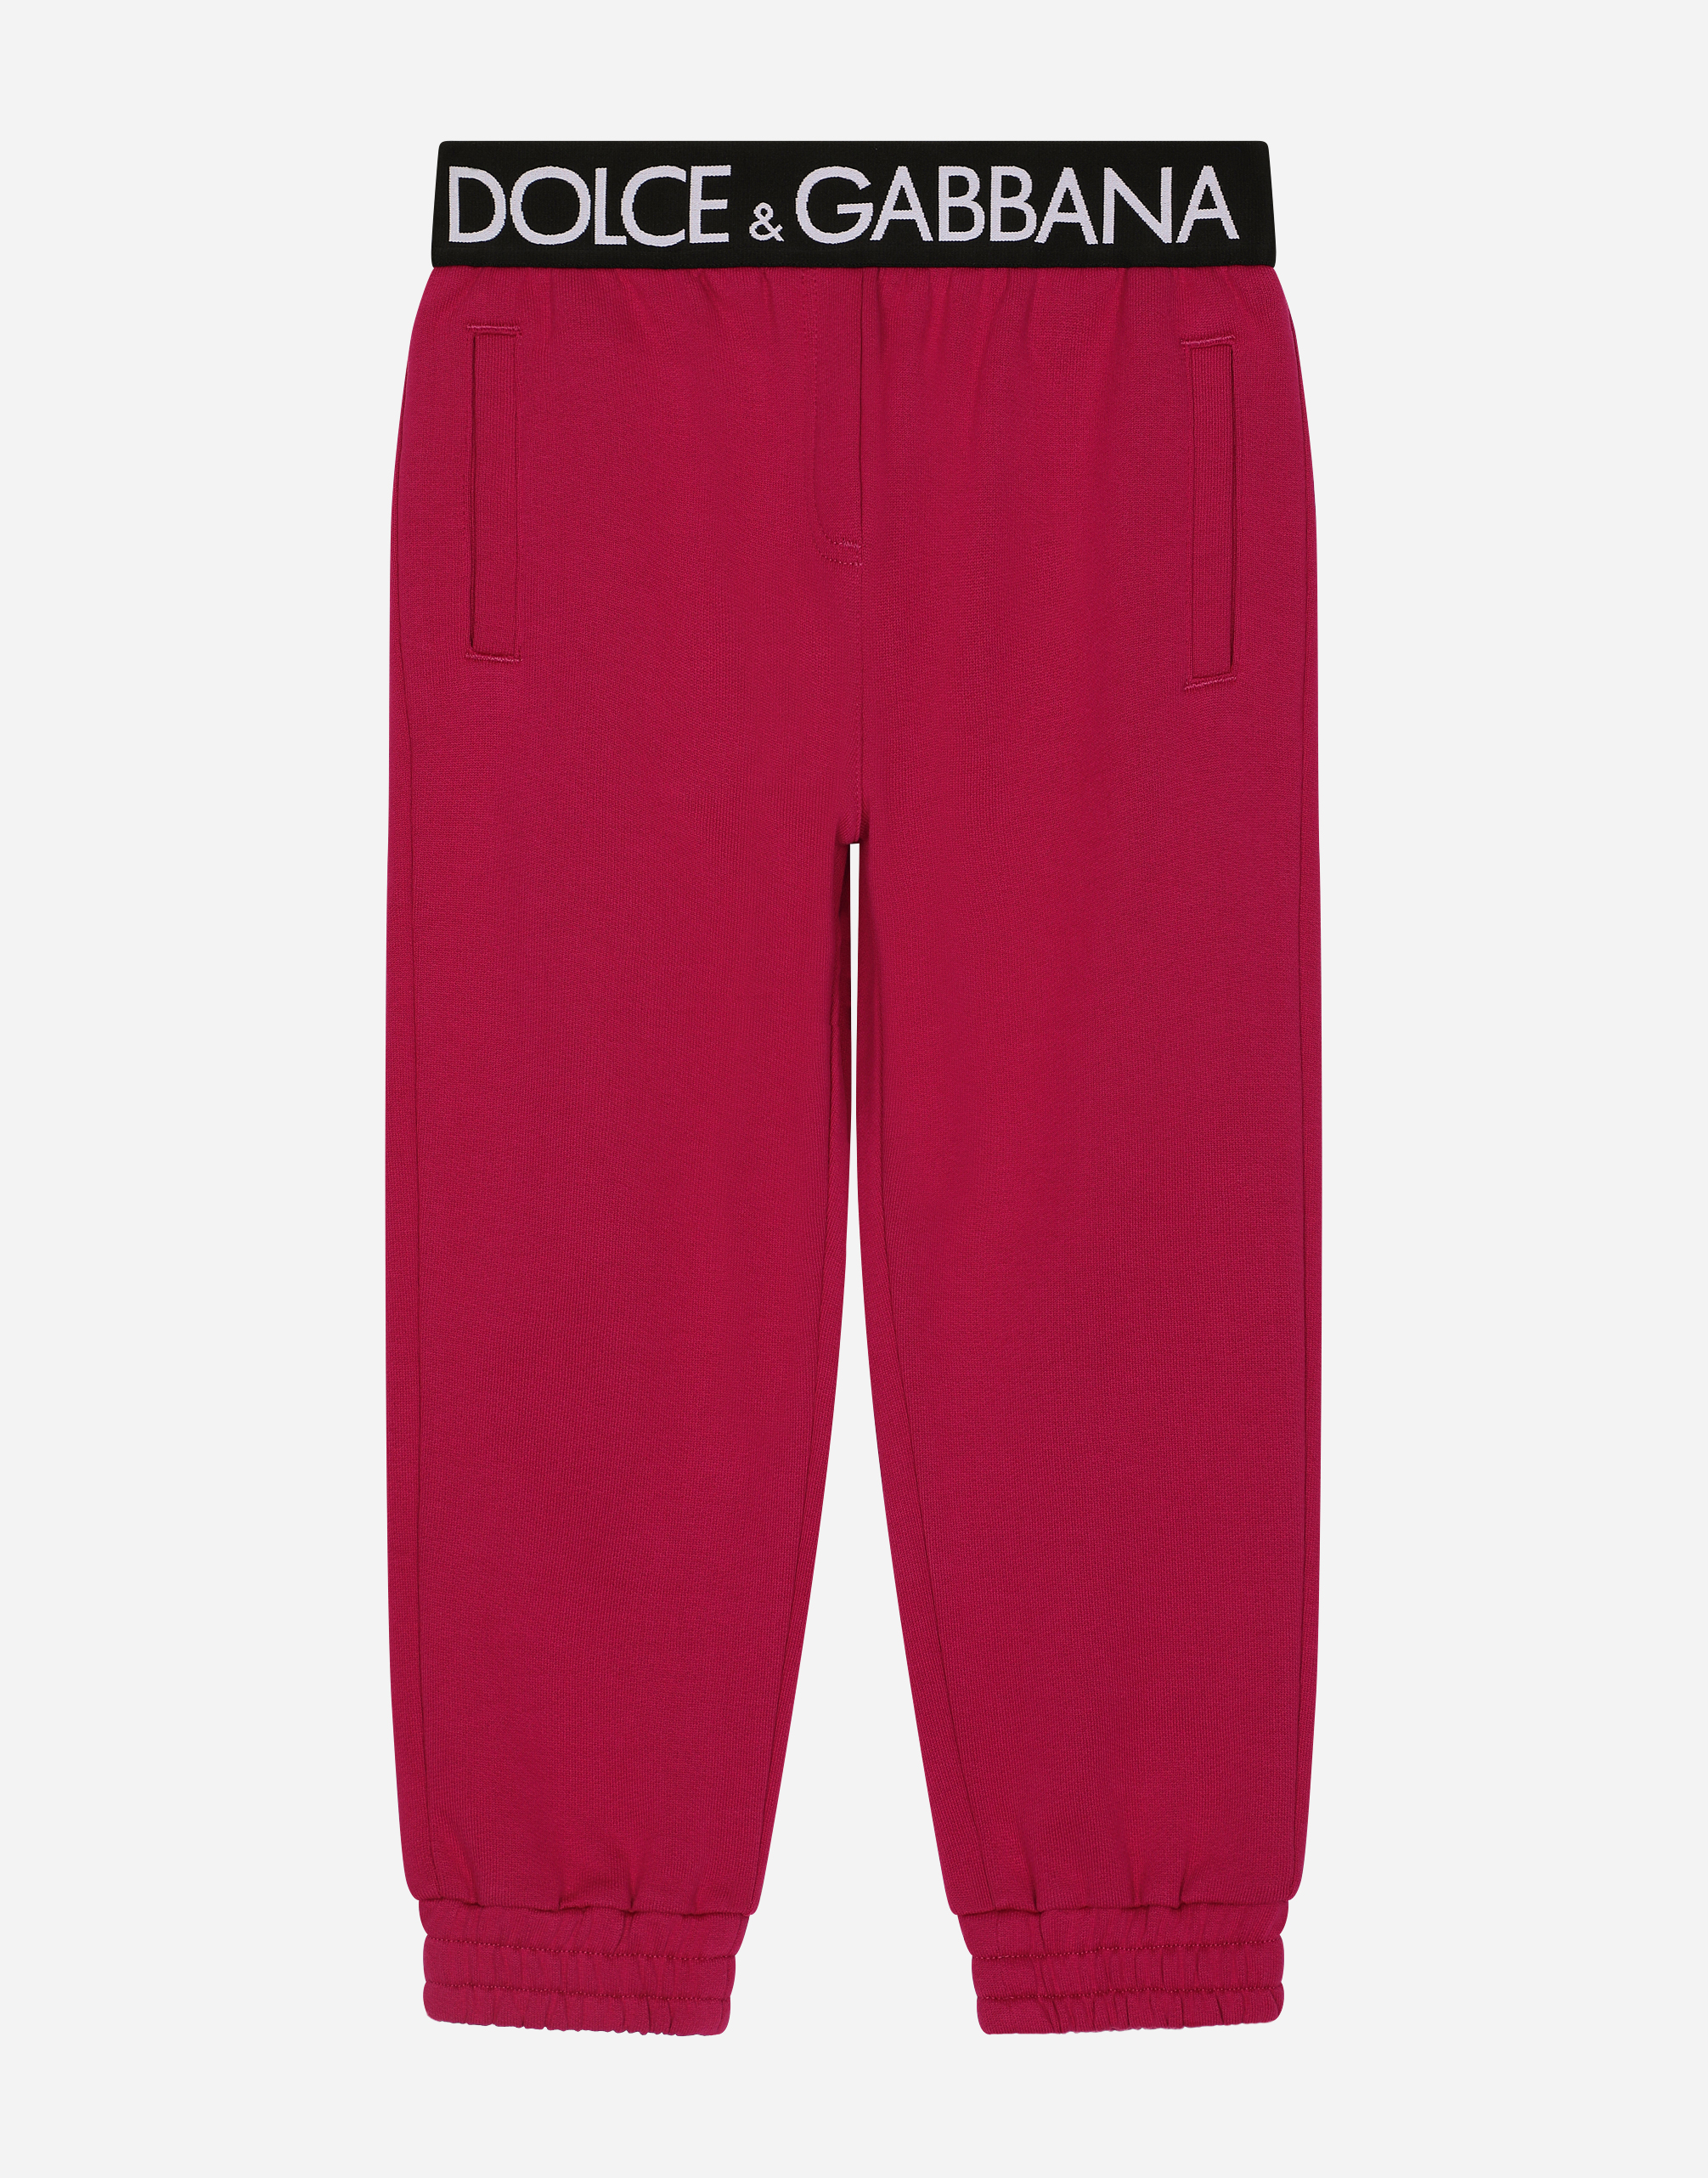 Dolce & Gabbana Kids' Jersey Jogging Pants With Branded Elastic In Fuchsia